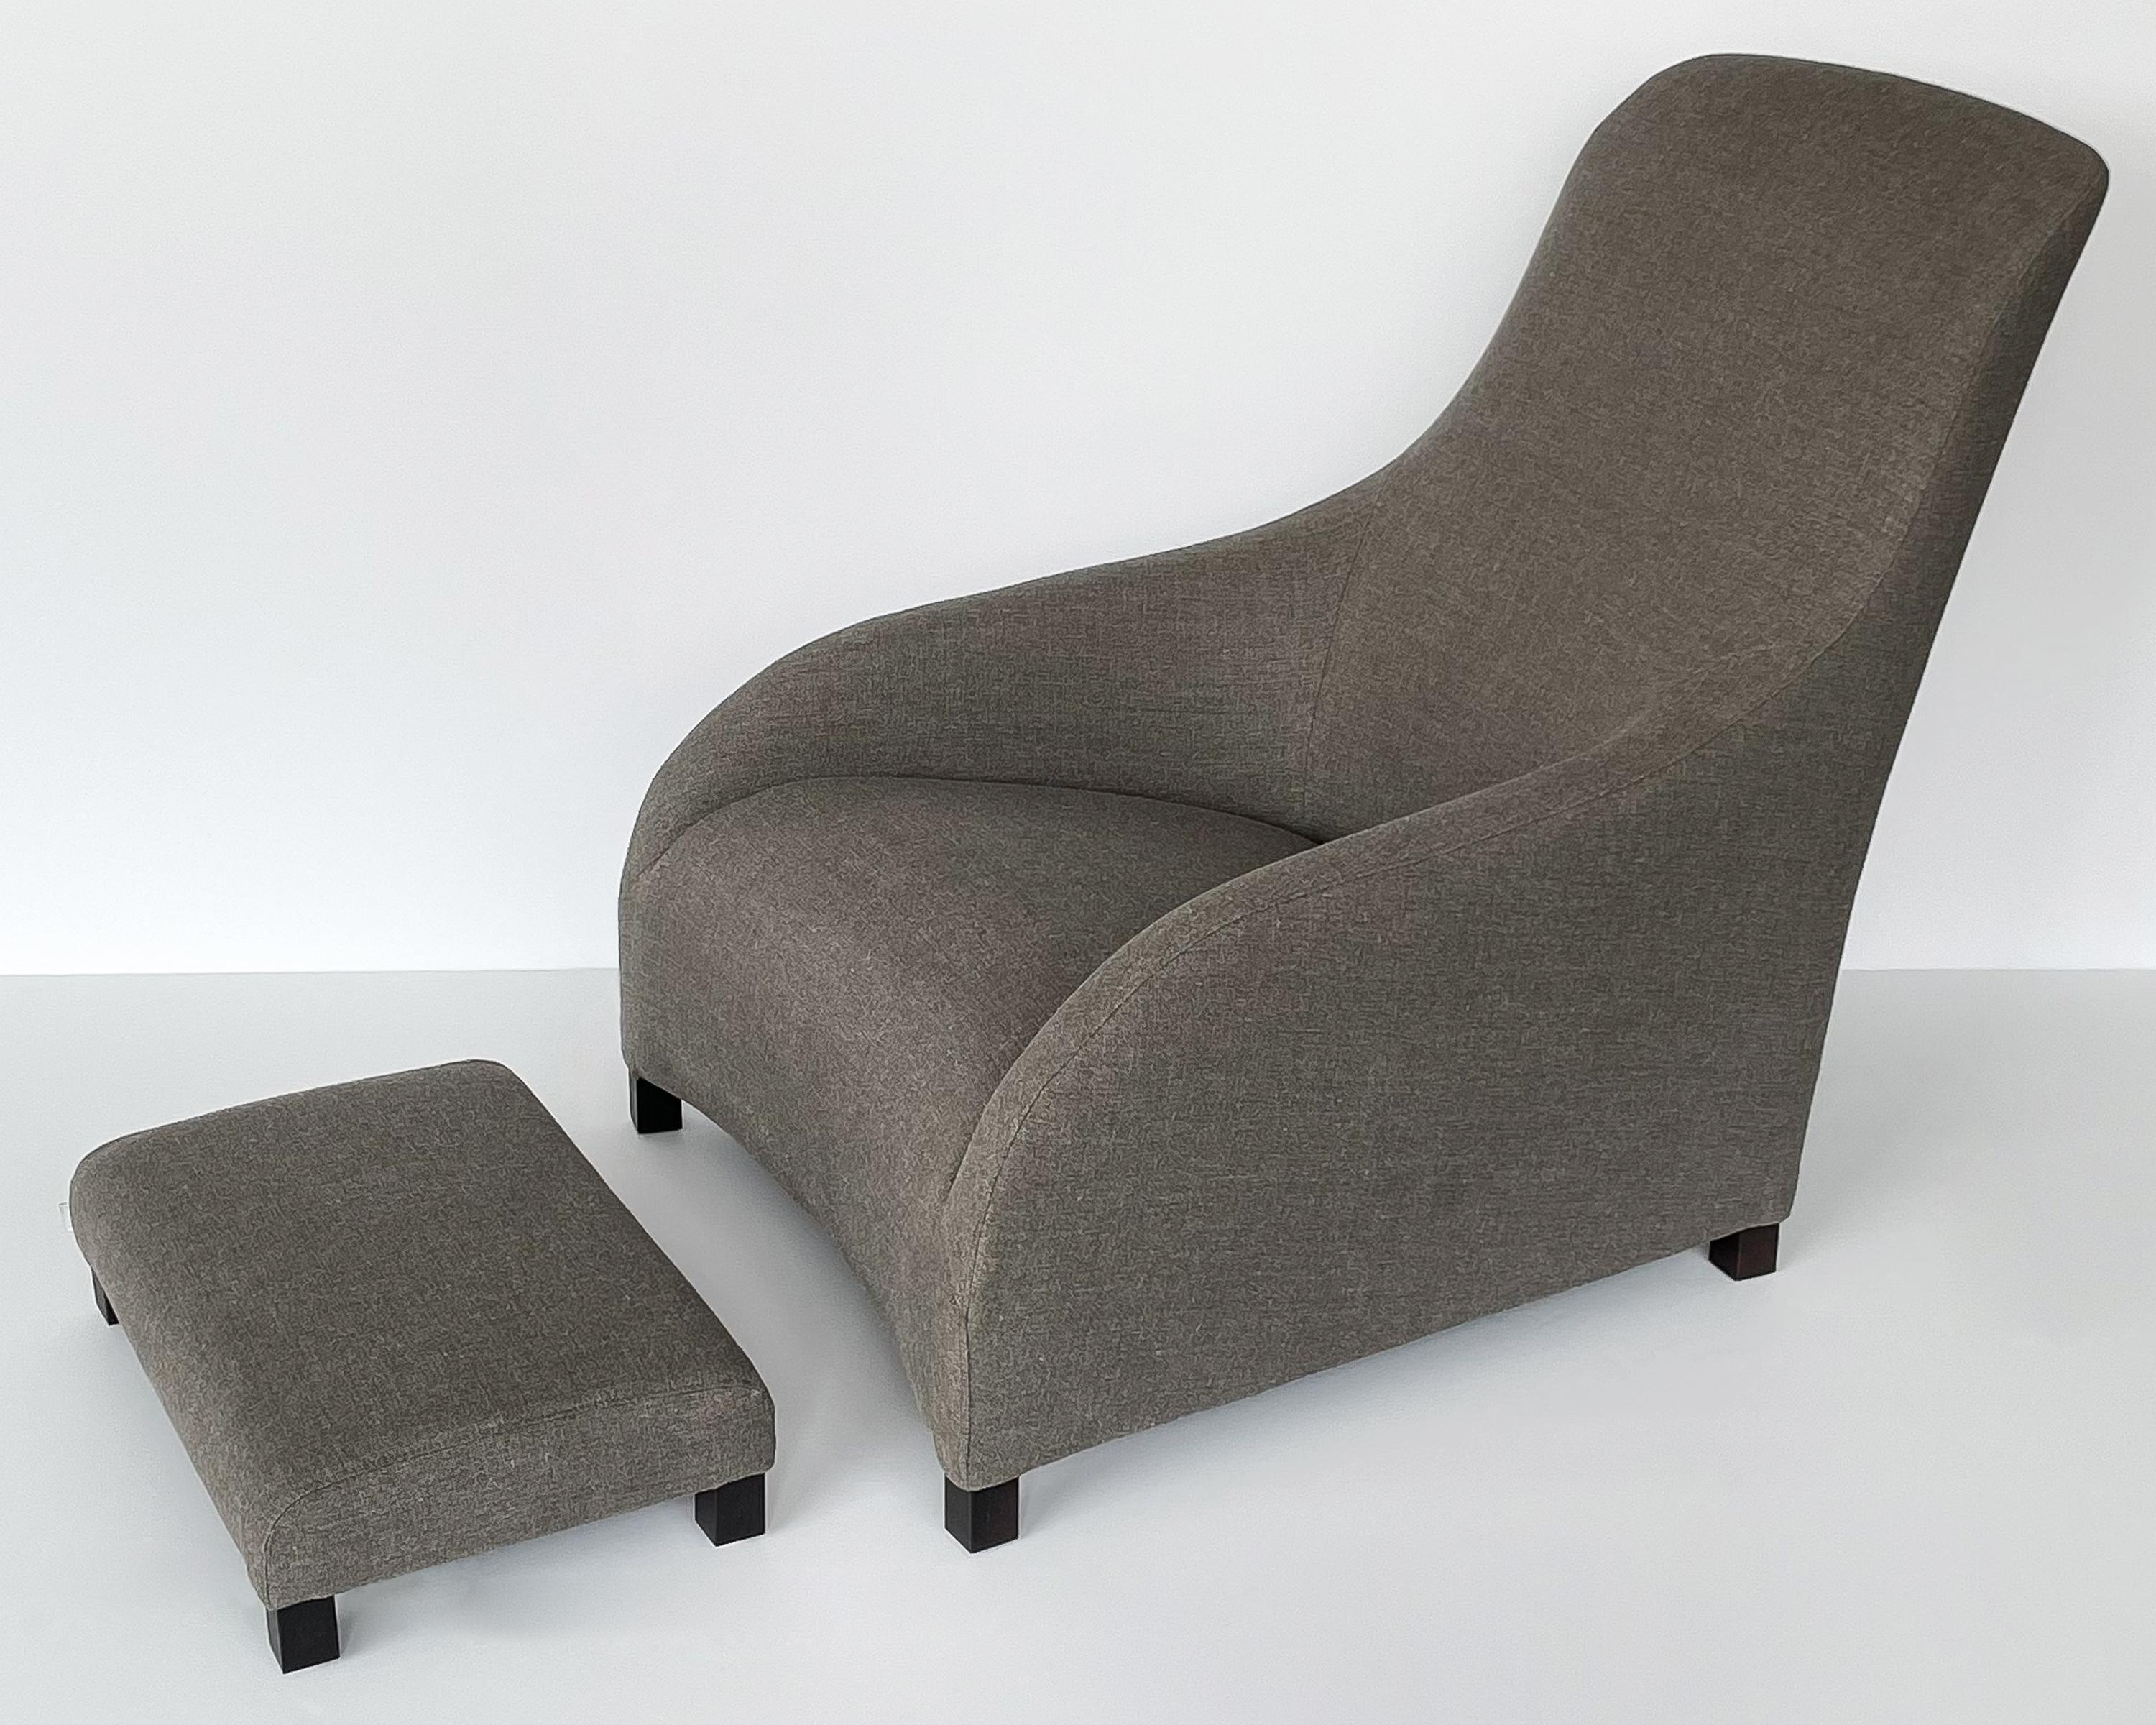 Kalos lounge chair and ottoman designed by Antonio Citterio for B&B Italia / Maxalto, designed in 1997. This chair and ottoman have been newly upholstered in a warm medium gray Belgian linen. Both the chair and ottoman retain the original tags and